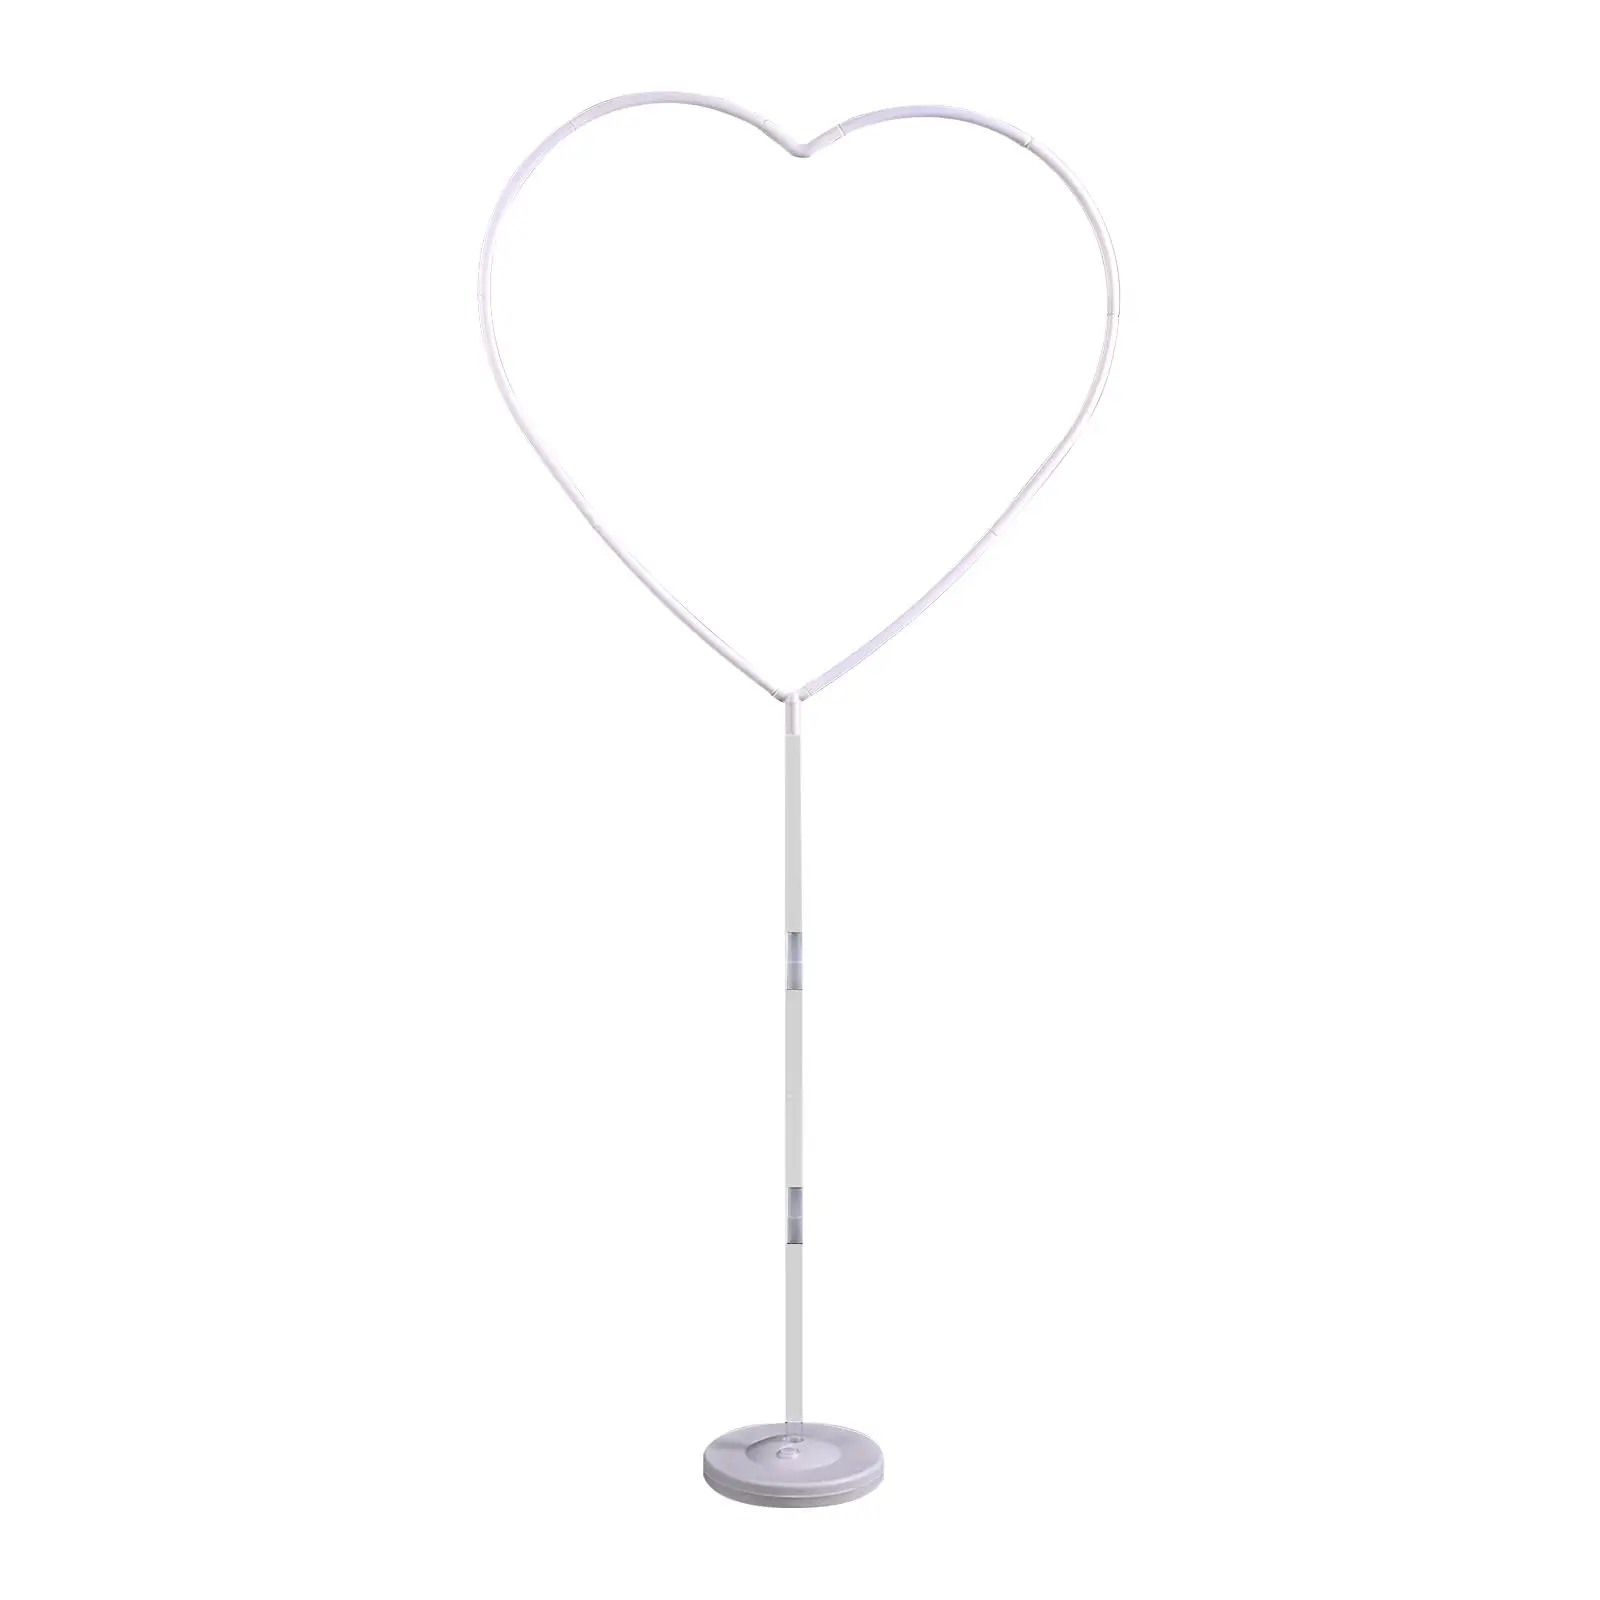 Heart Shaped Balloon Arch Stand Frame Display Kit for Wedding Decoration